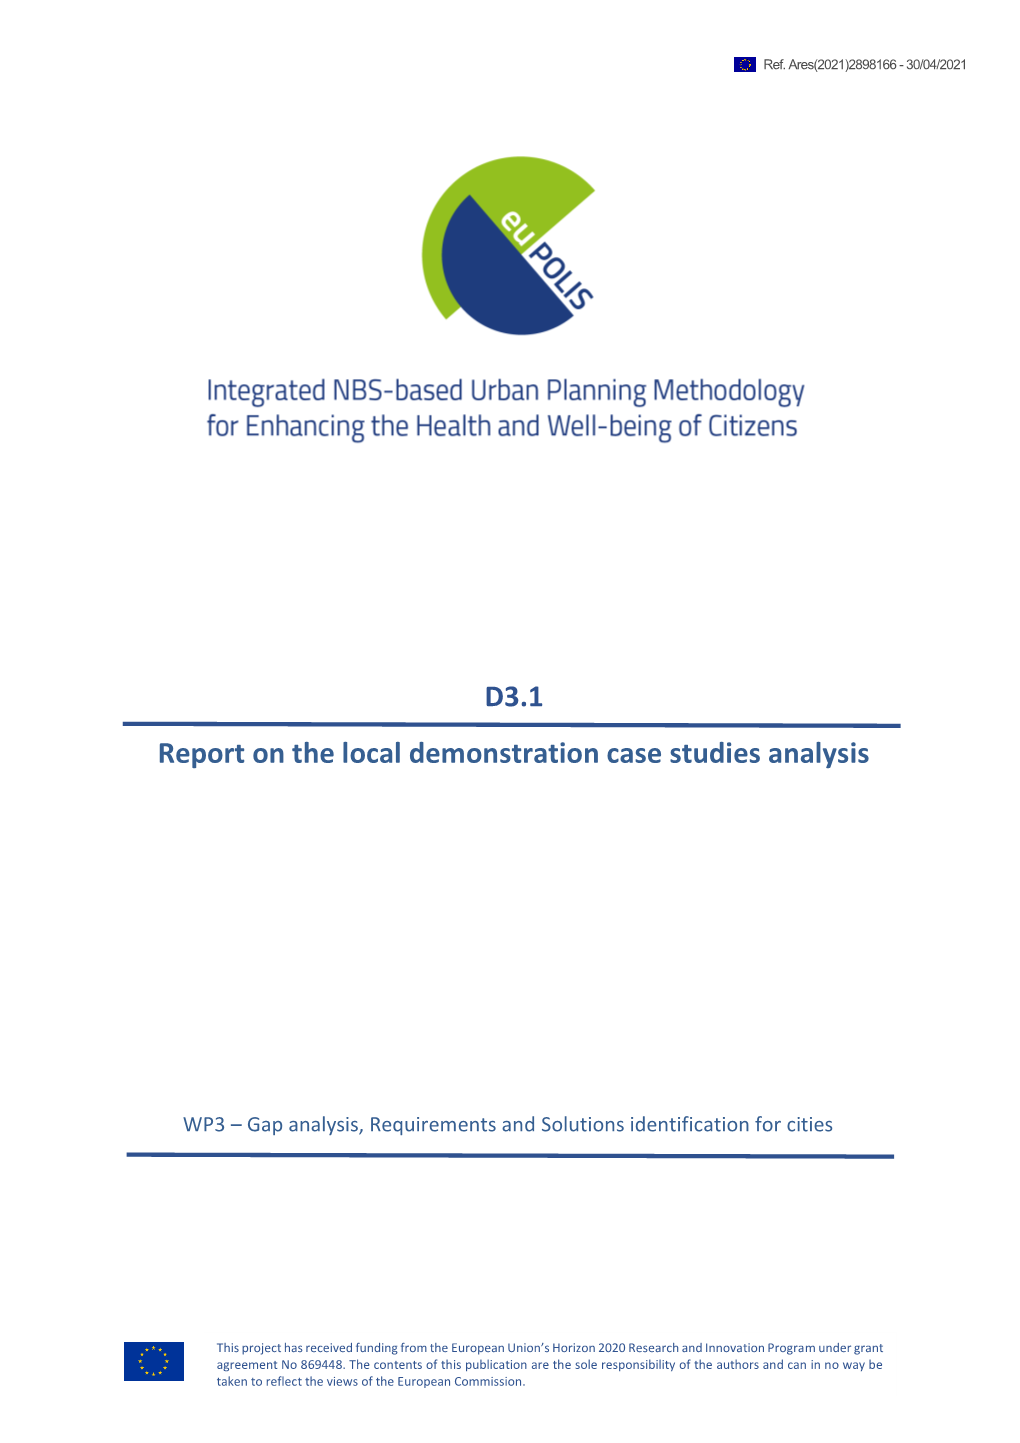 Report on the Local Demonstration Case Studies Analysis